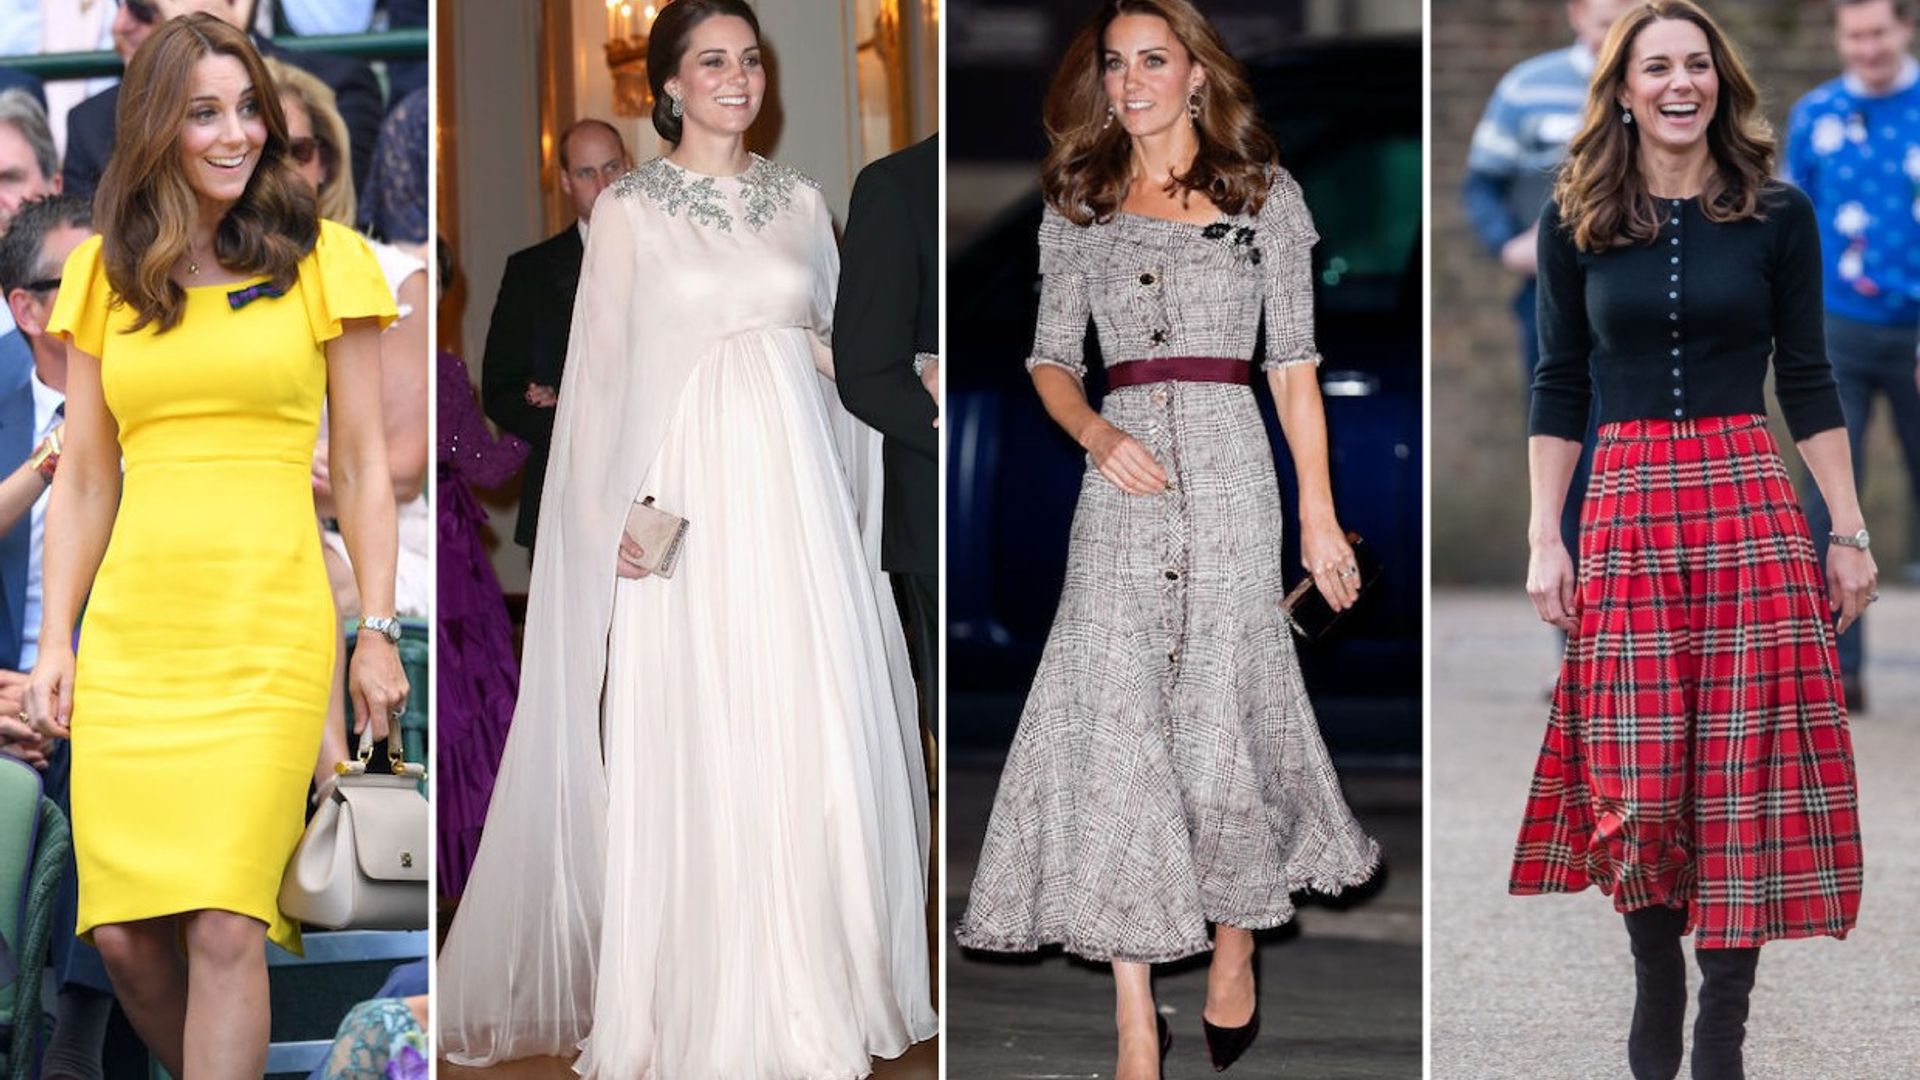 These are Duchess Kate's most stylish outfits of 2018 – see the pictures